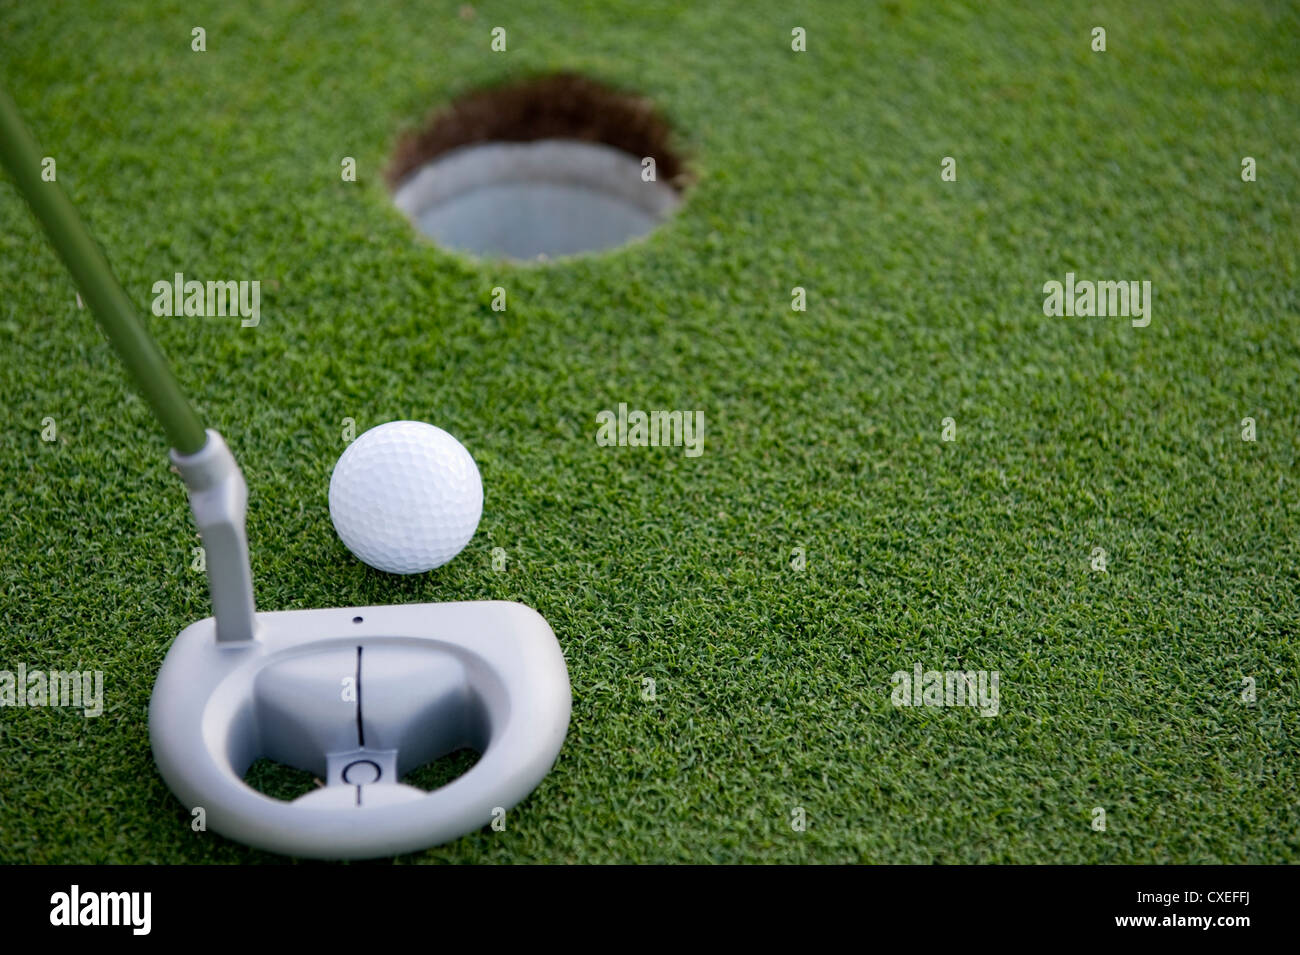 A very short putt in the game of golf on a putting green at a golf course with copy space Stock Photo